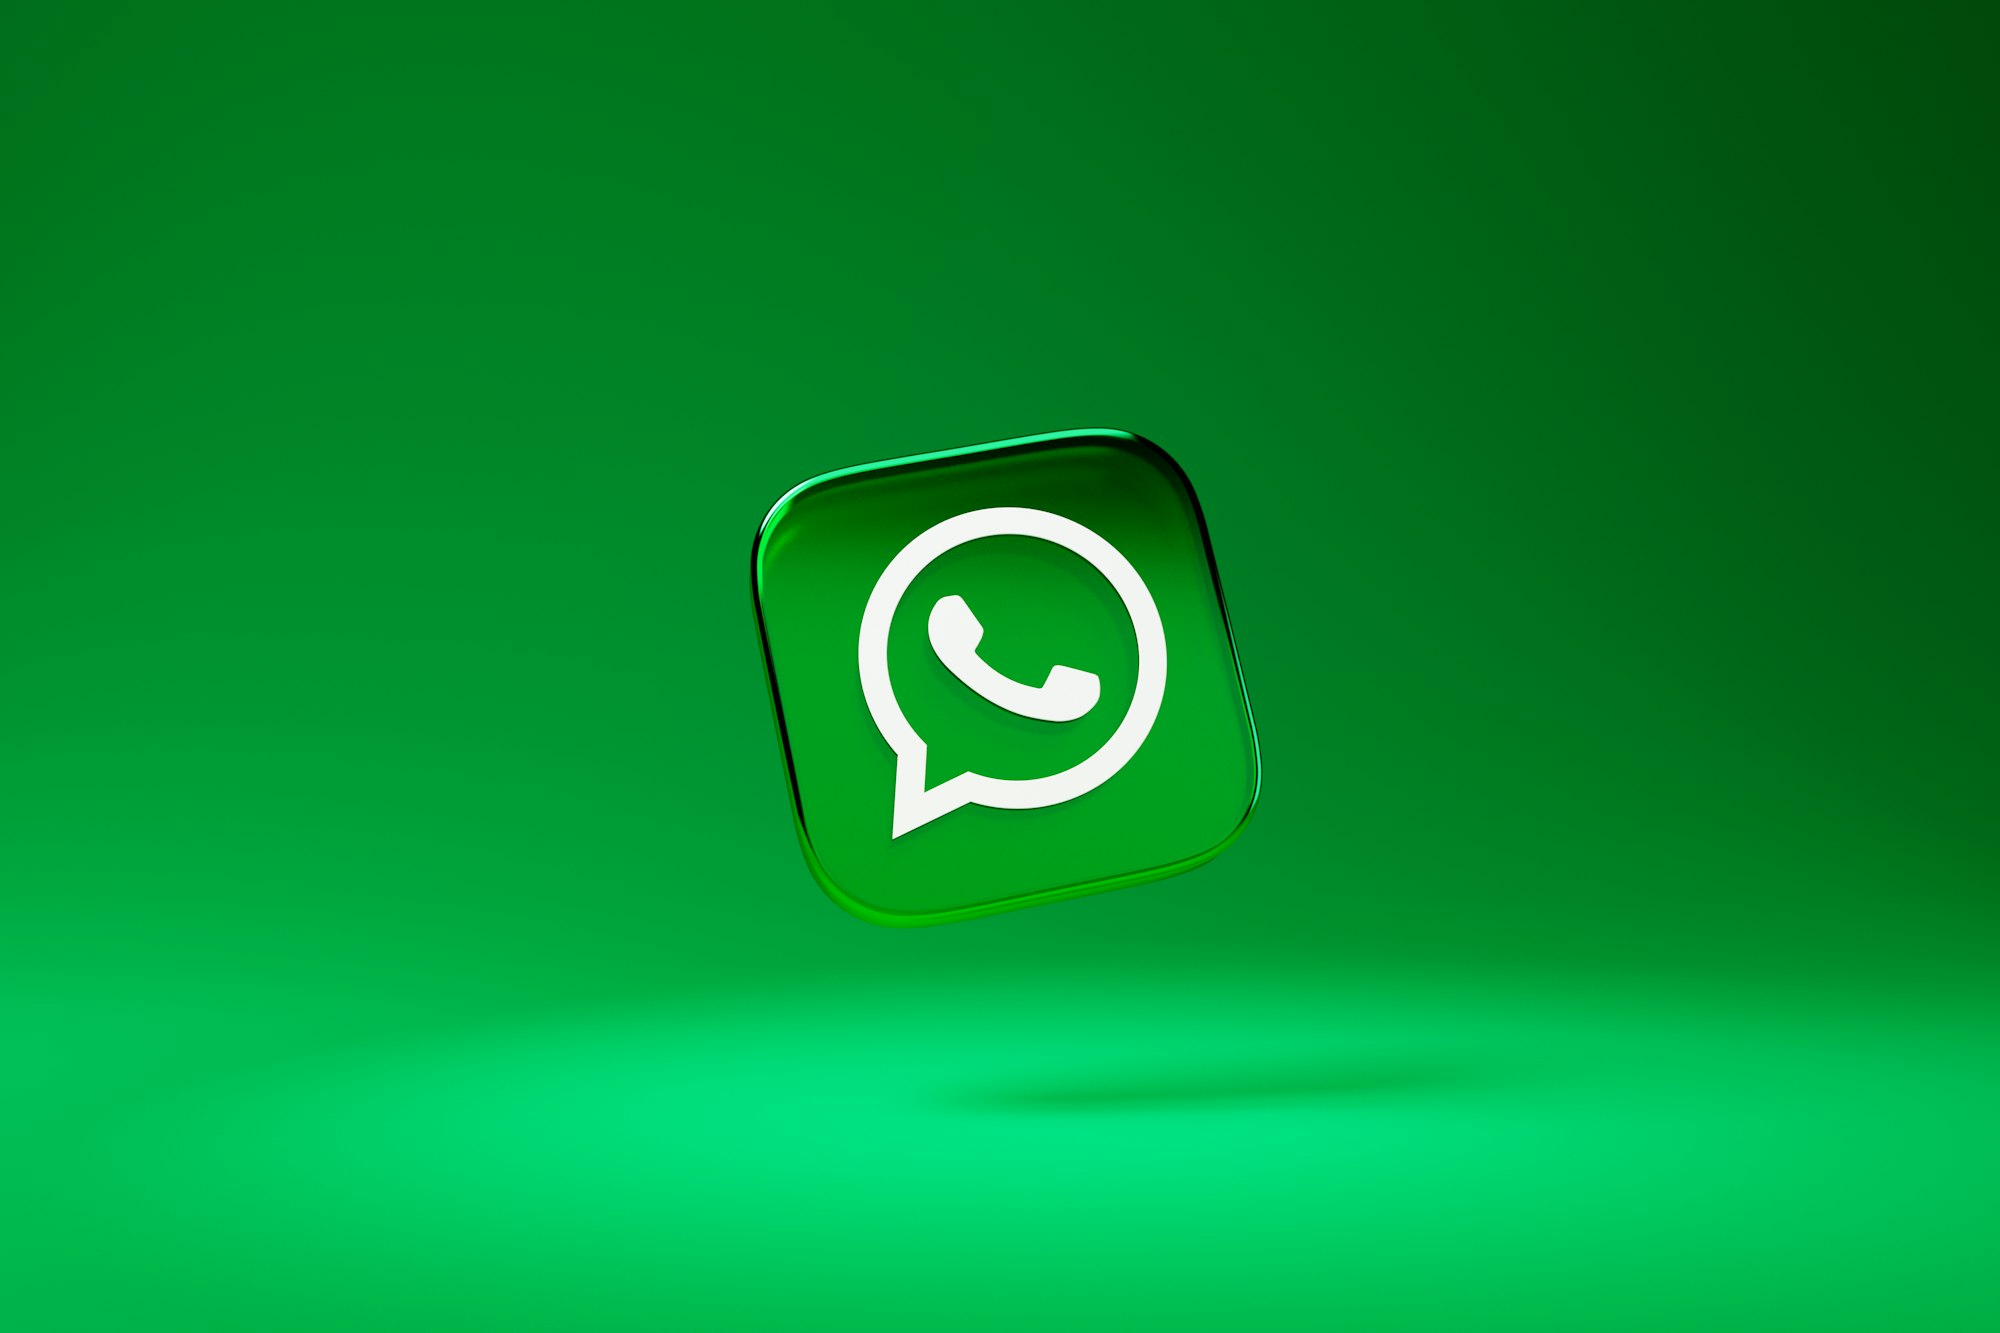 WhatsApp expands its multi-device feature to support additional smartphones